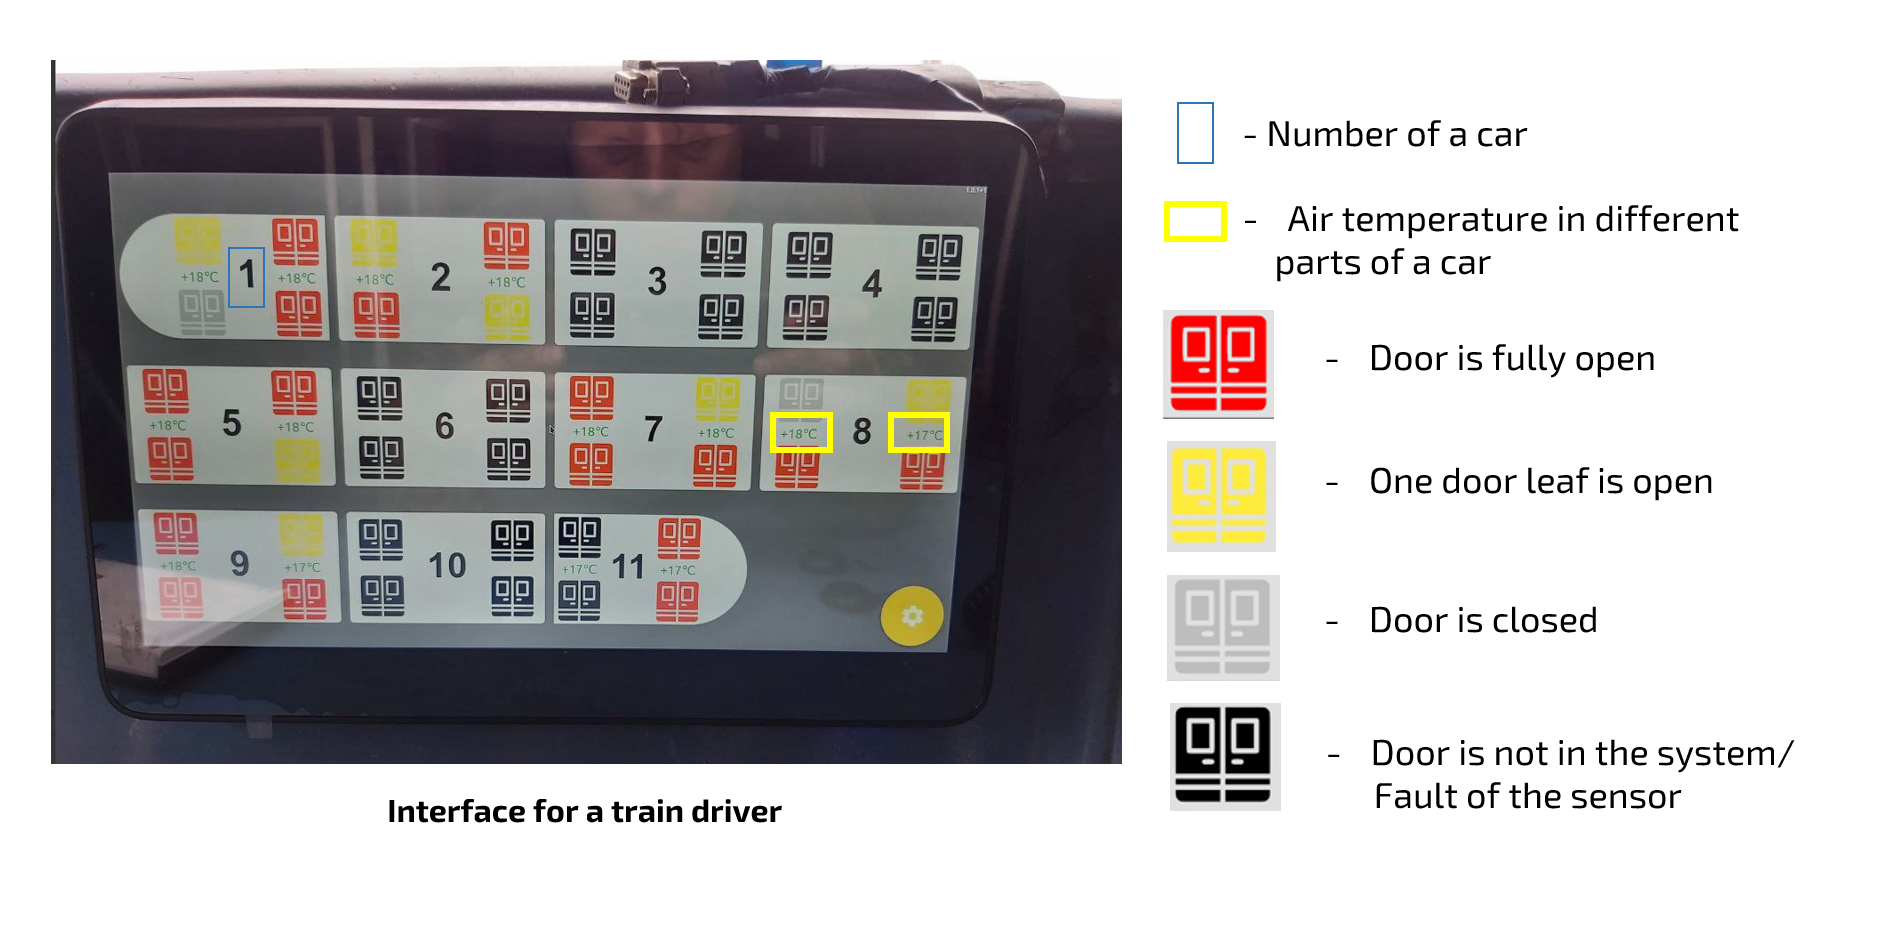 The drivers interface of automated multiple units operation control system by VNIIZHT